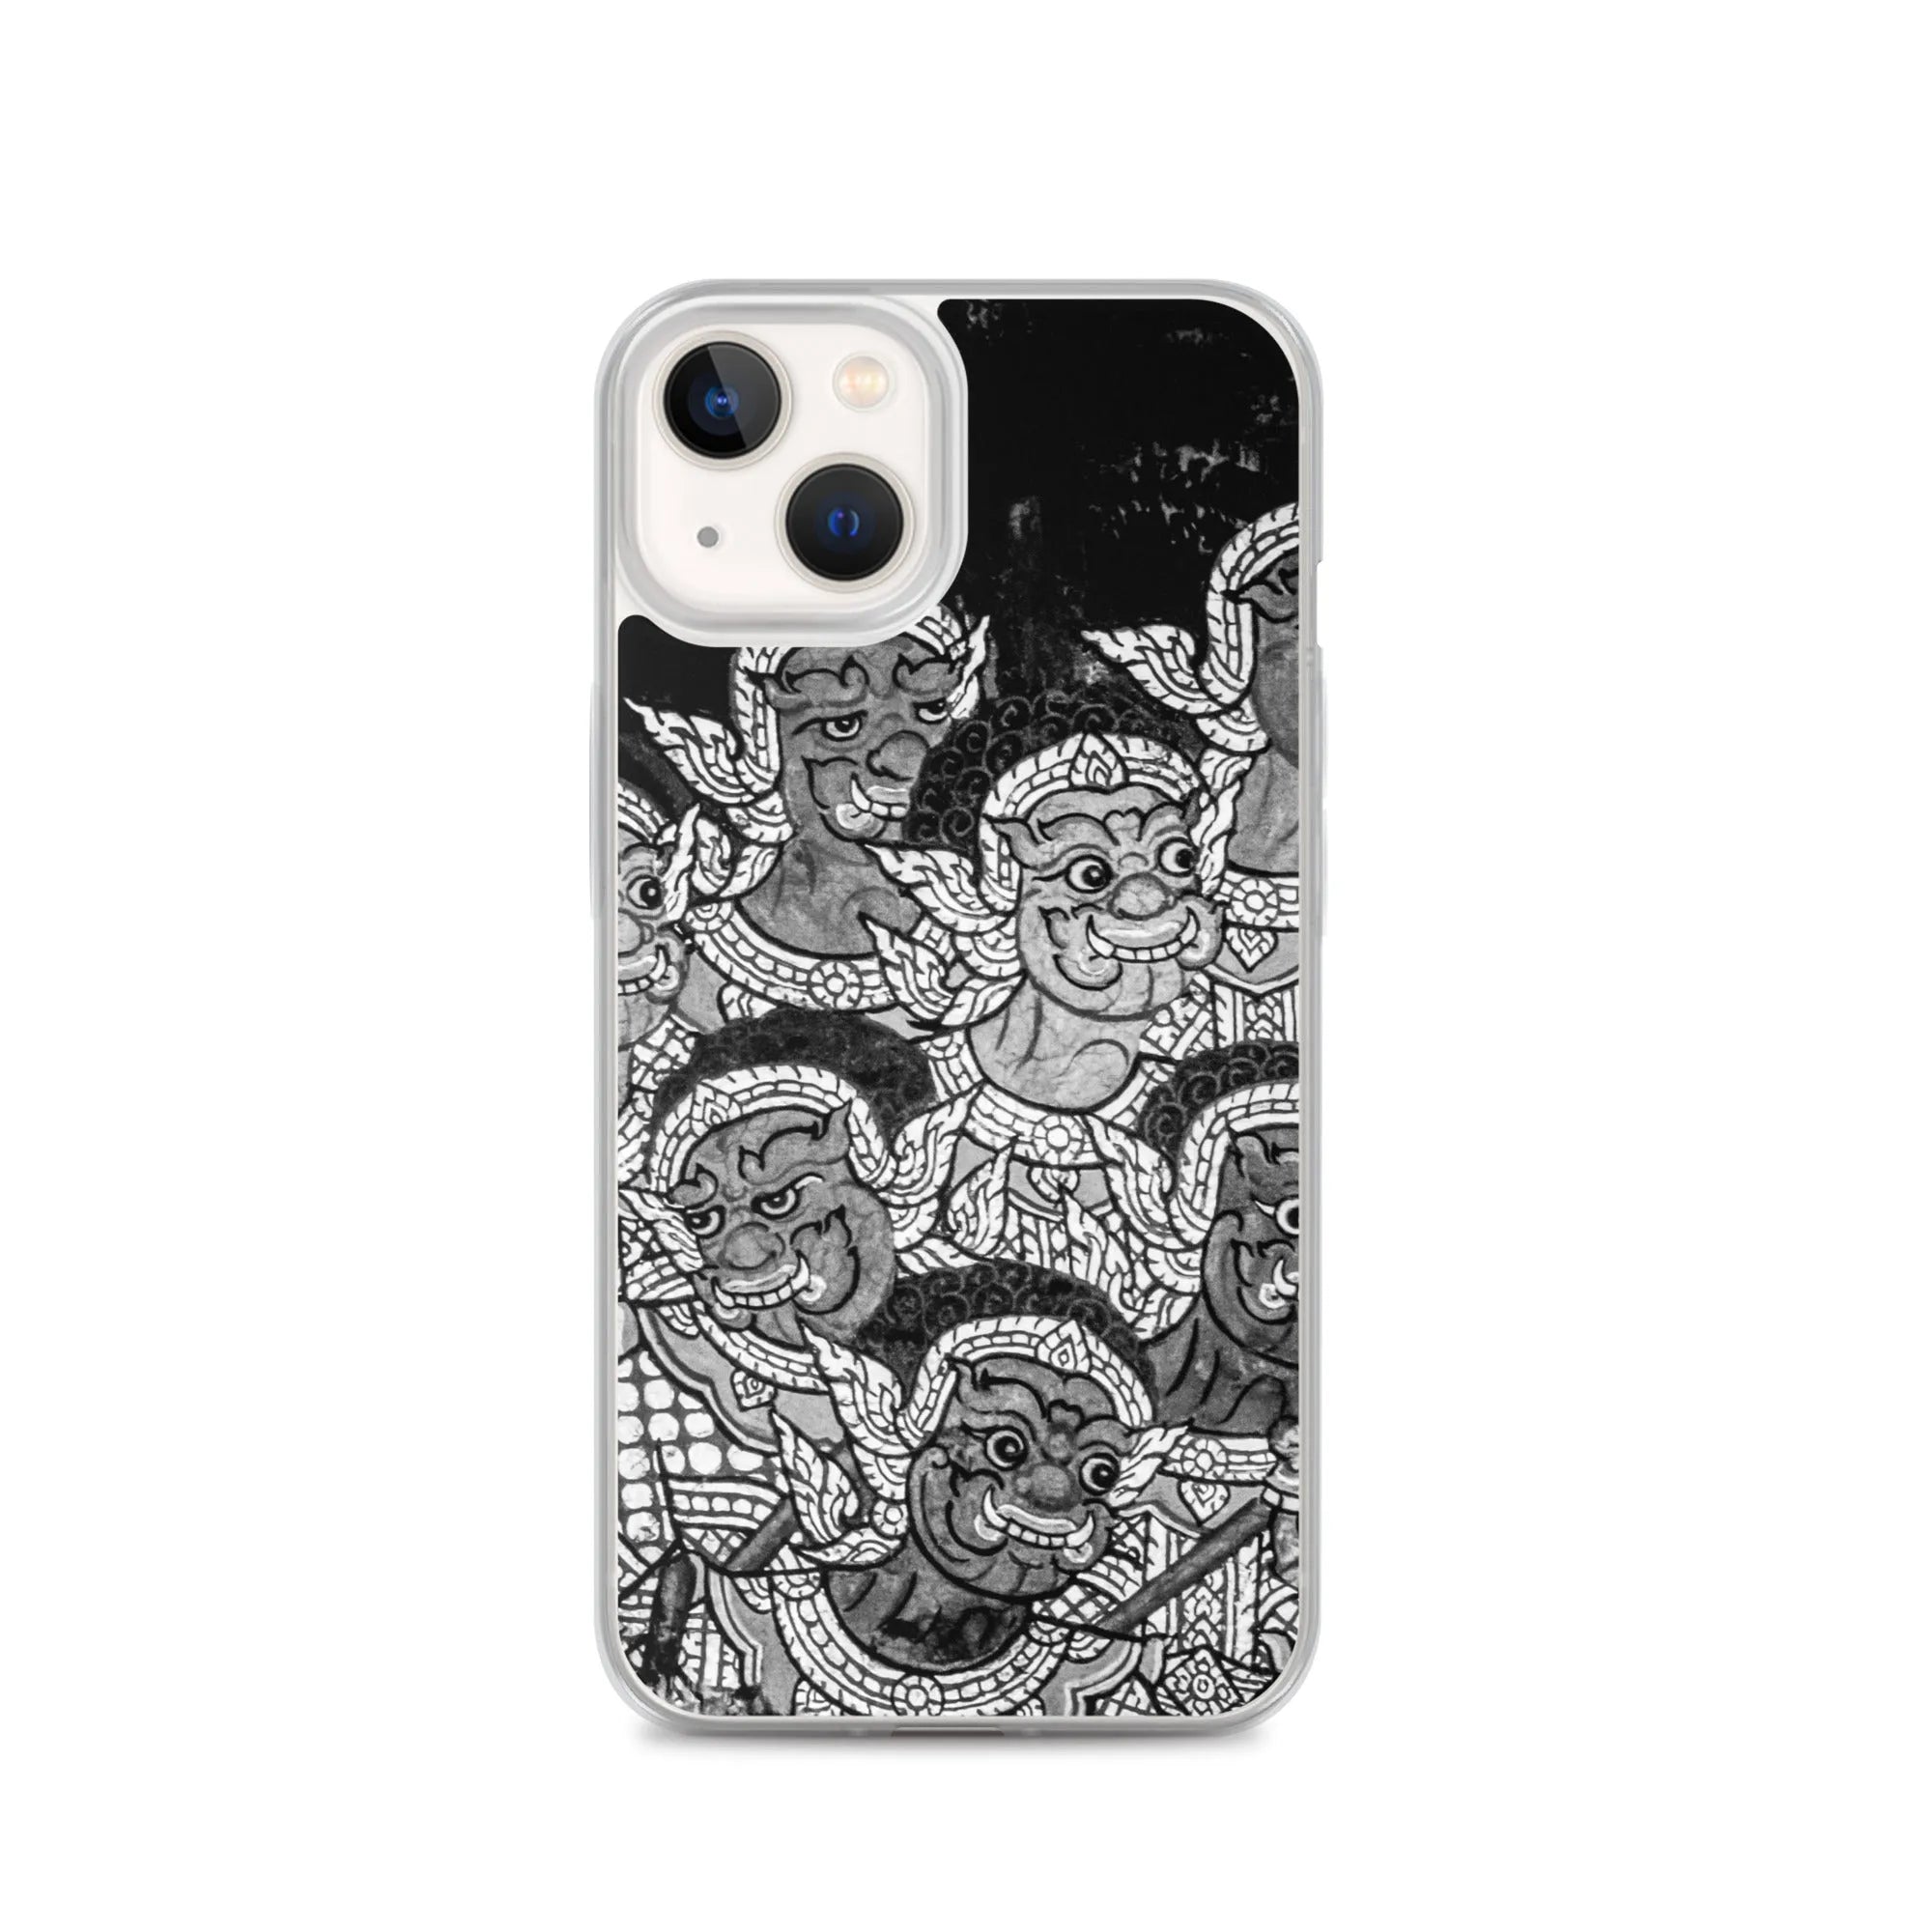 Babes In The Woods - Designer Travels Art Iphone Case - black And White - Iphone 13 - Mobile Phone Cases - Aesthetic Art